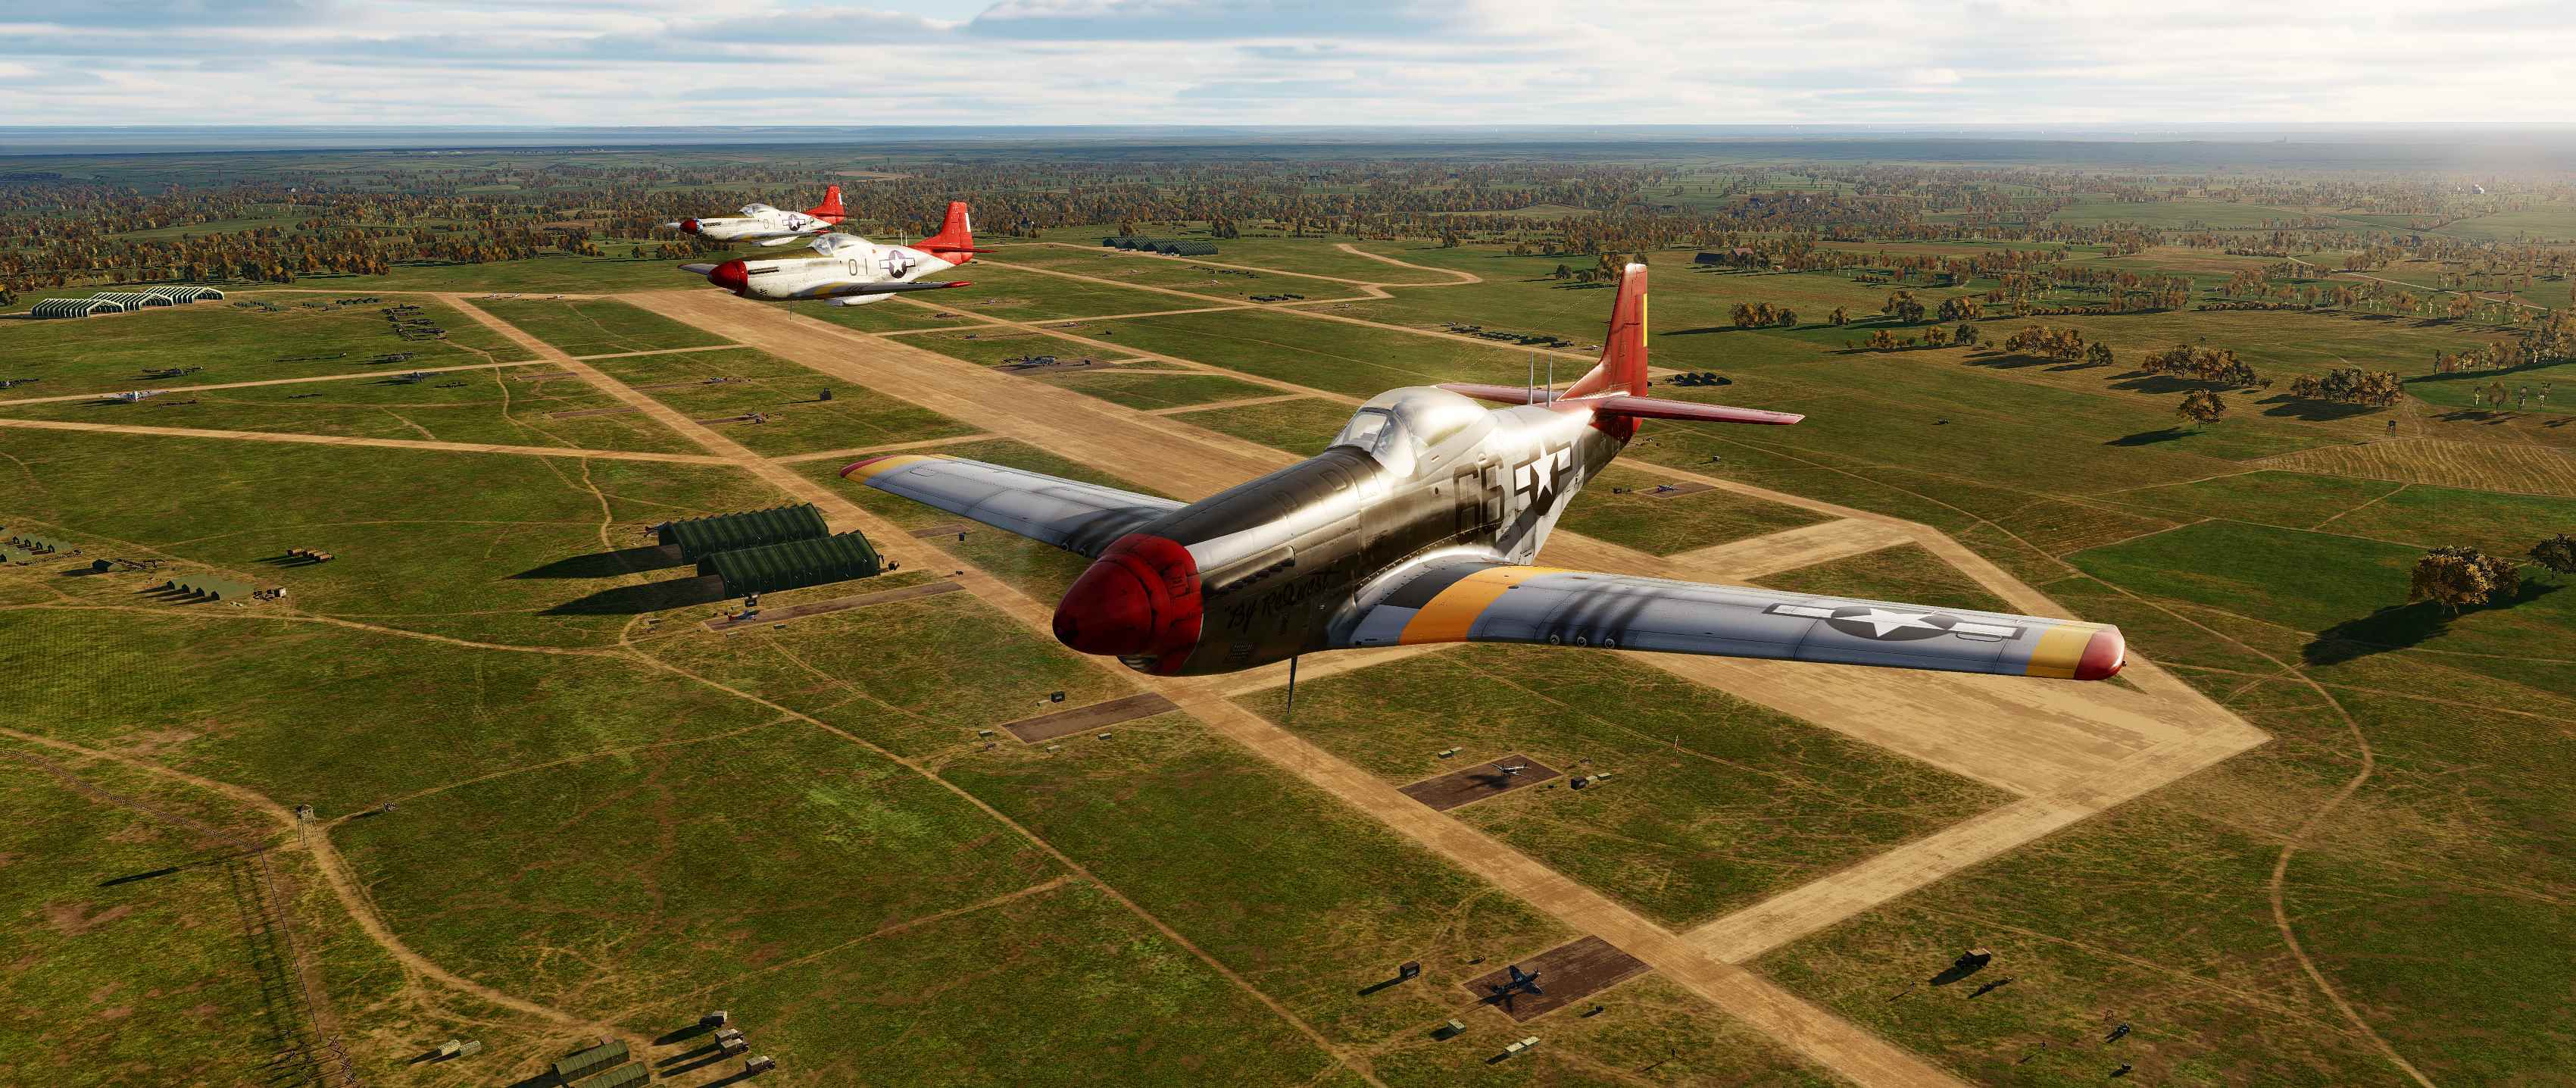 Normandy2  332nd Squadron "Red Tails" Airfield in LANTHEUIL